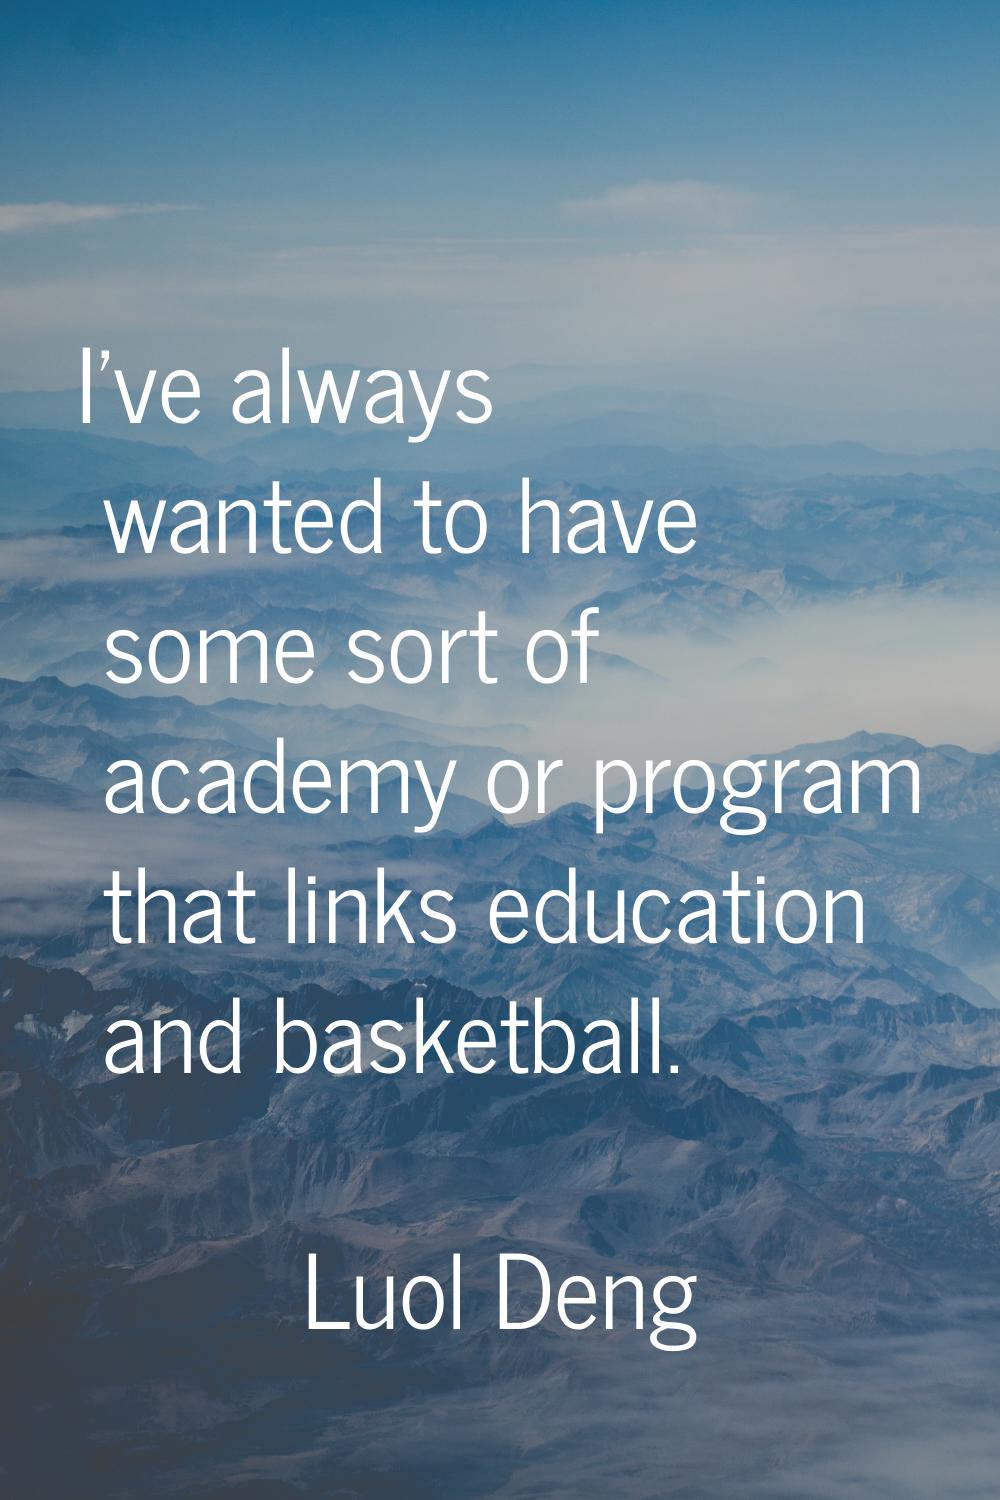 I've always wanted to have some sort of academy or program that links education and basketball.